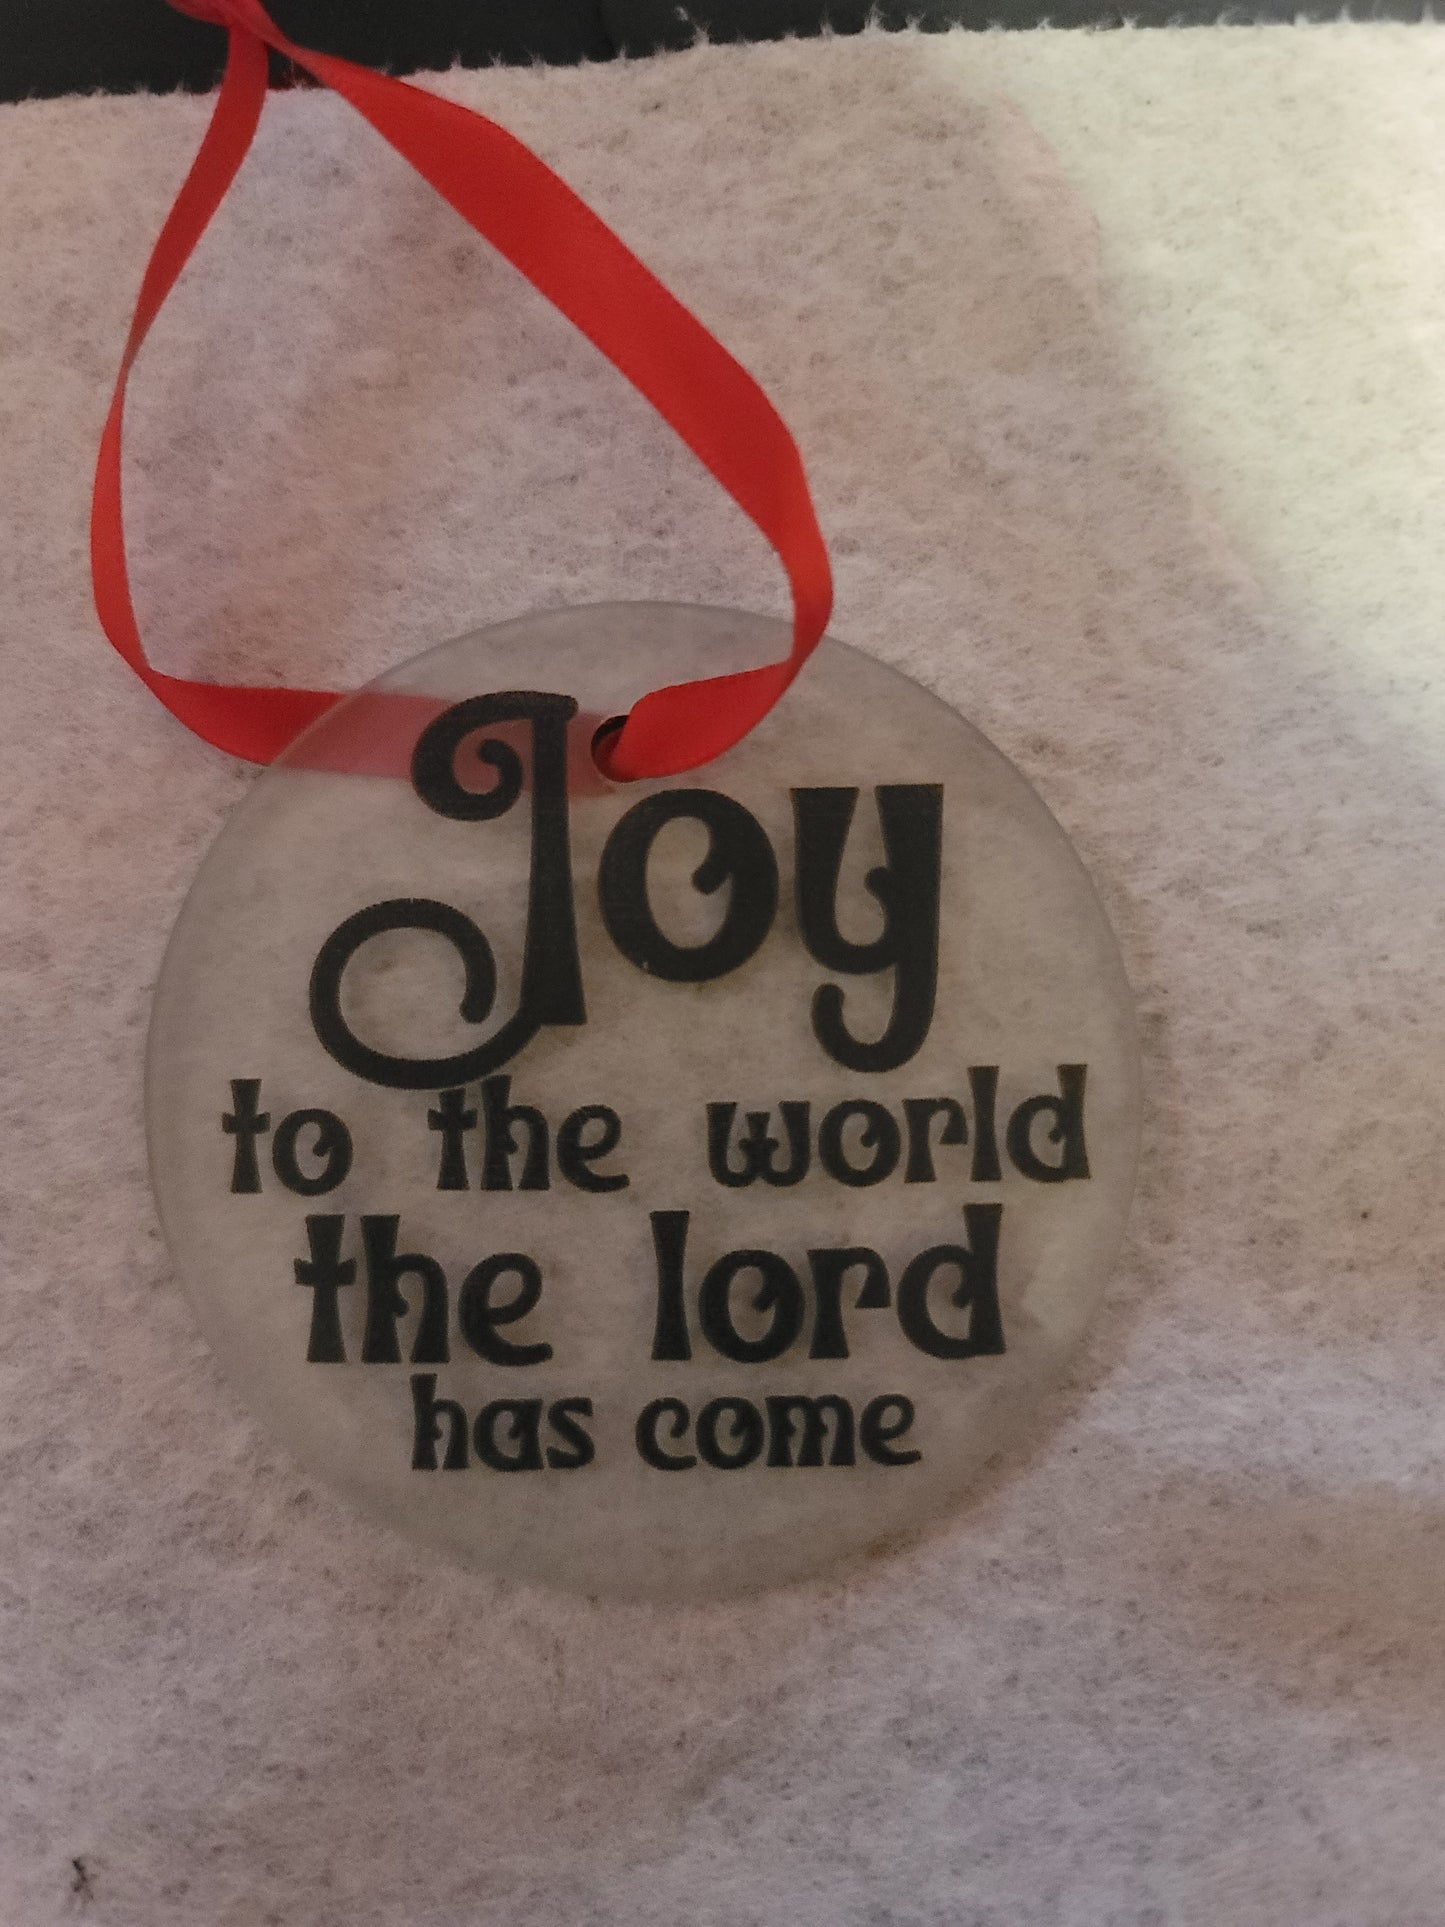 Engraved 3" Glass Ornaments